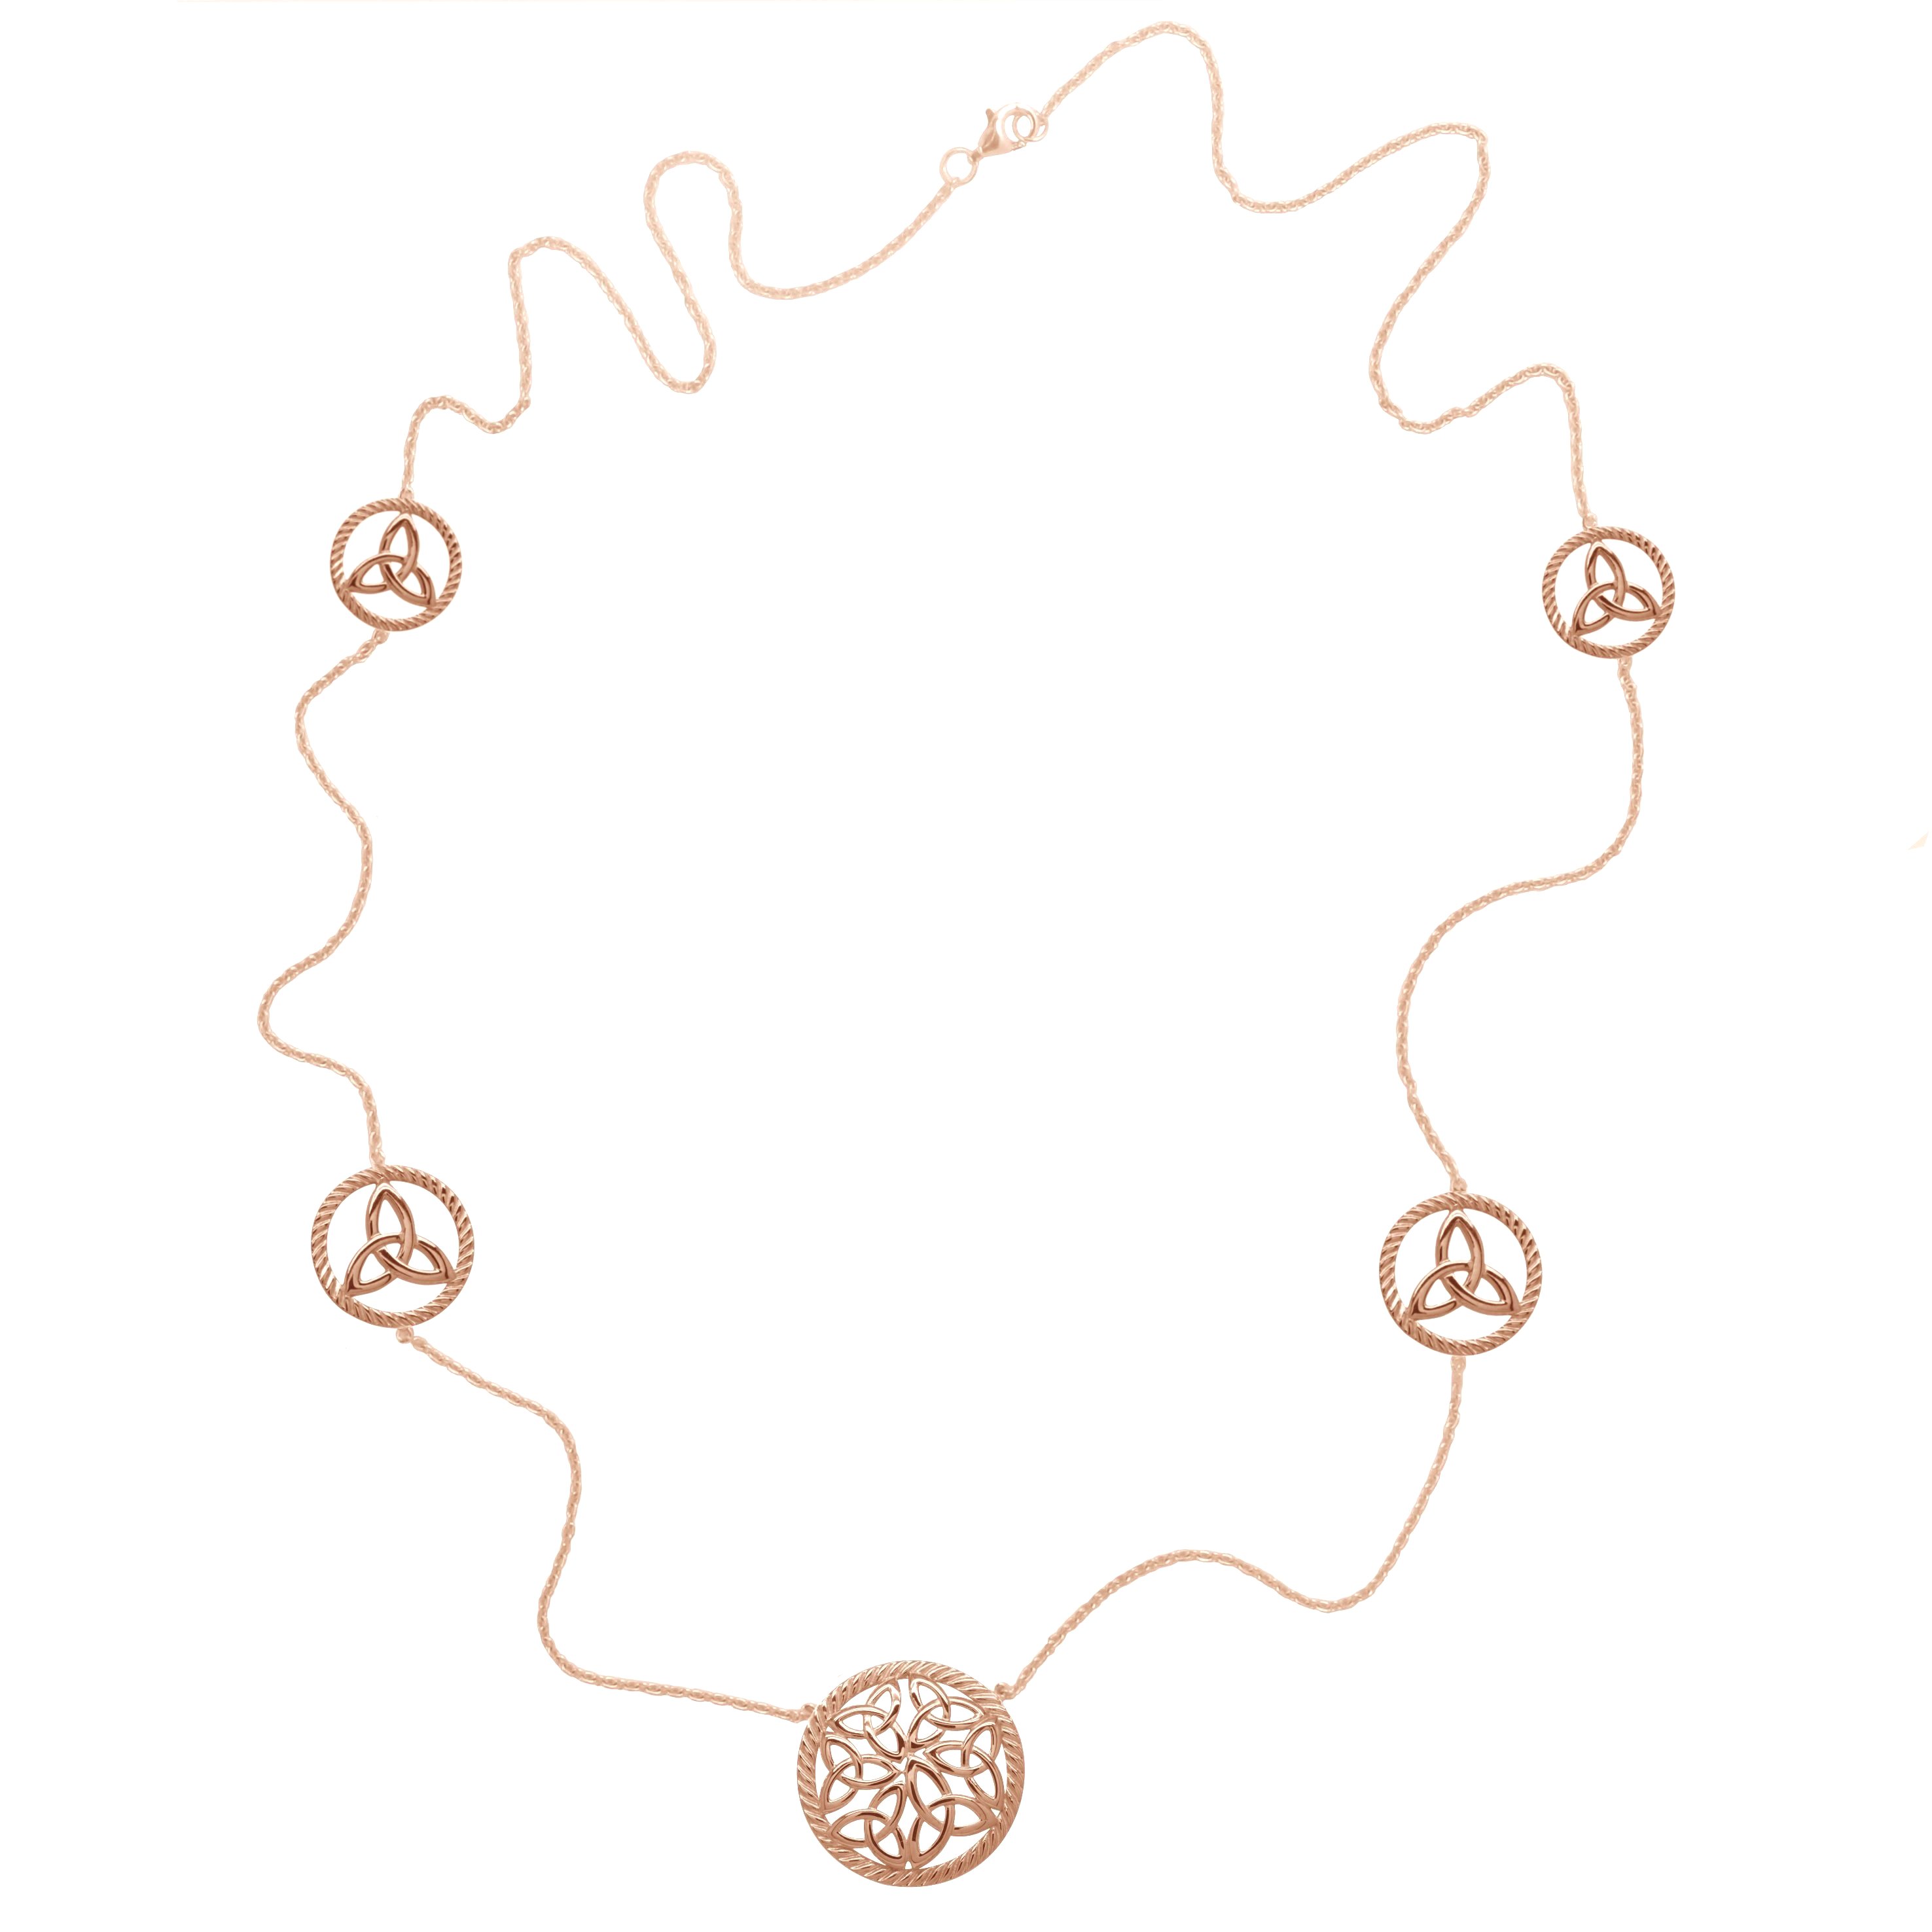 Product image for Irish Necklace | Rose Gold Plated Sterling Silver Trinity Knot Irish Necklet